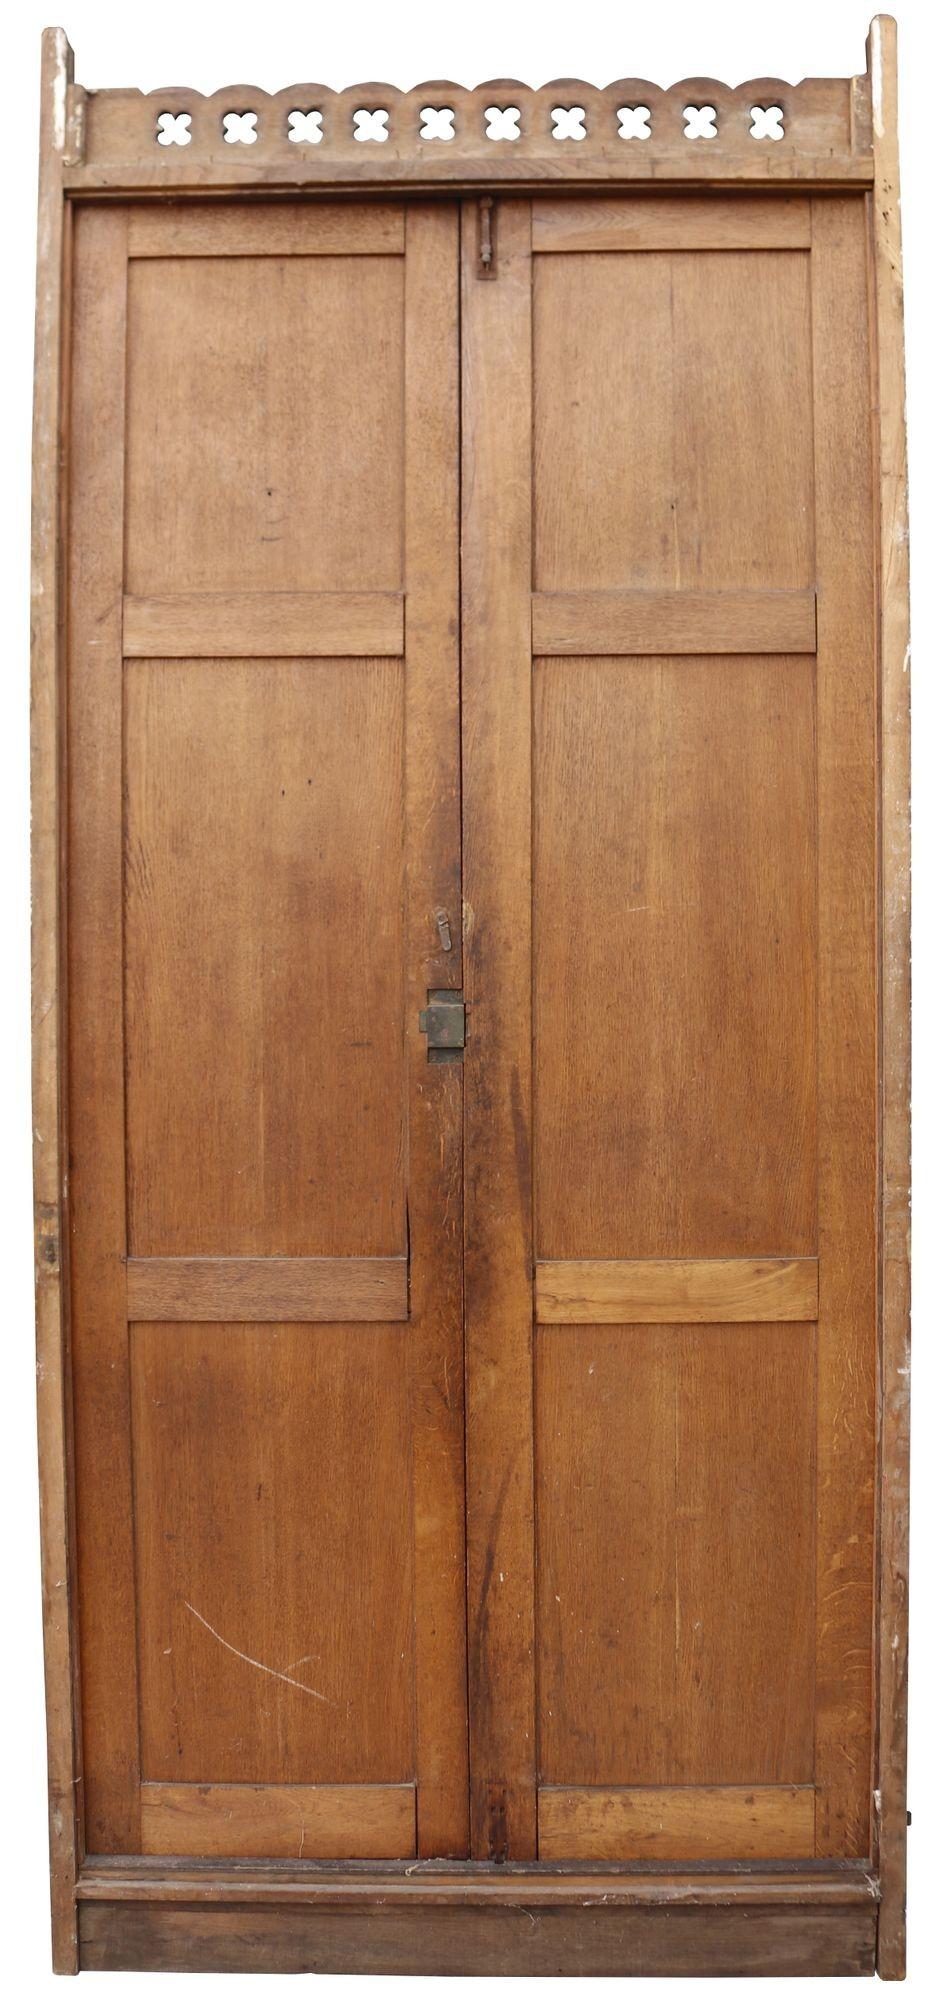 Set of antique oak panelled doors with frame. A wonderful set of six panelled Oak interior doors set within a frame. The panels feature carved linen folds with decorative wrought iron hinges and pierced quatrefoil fret to the top.
 
 
Additional